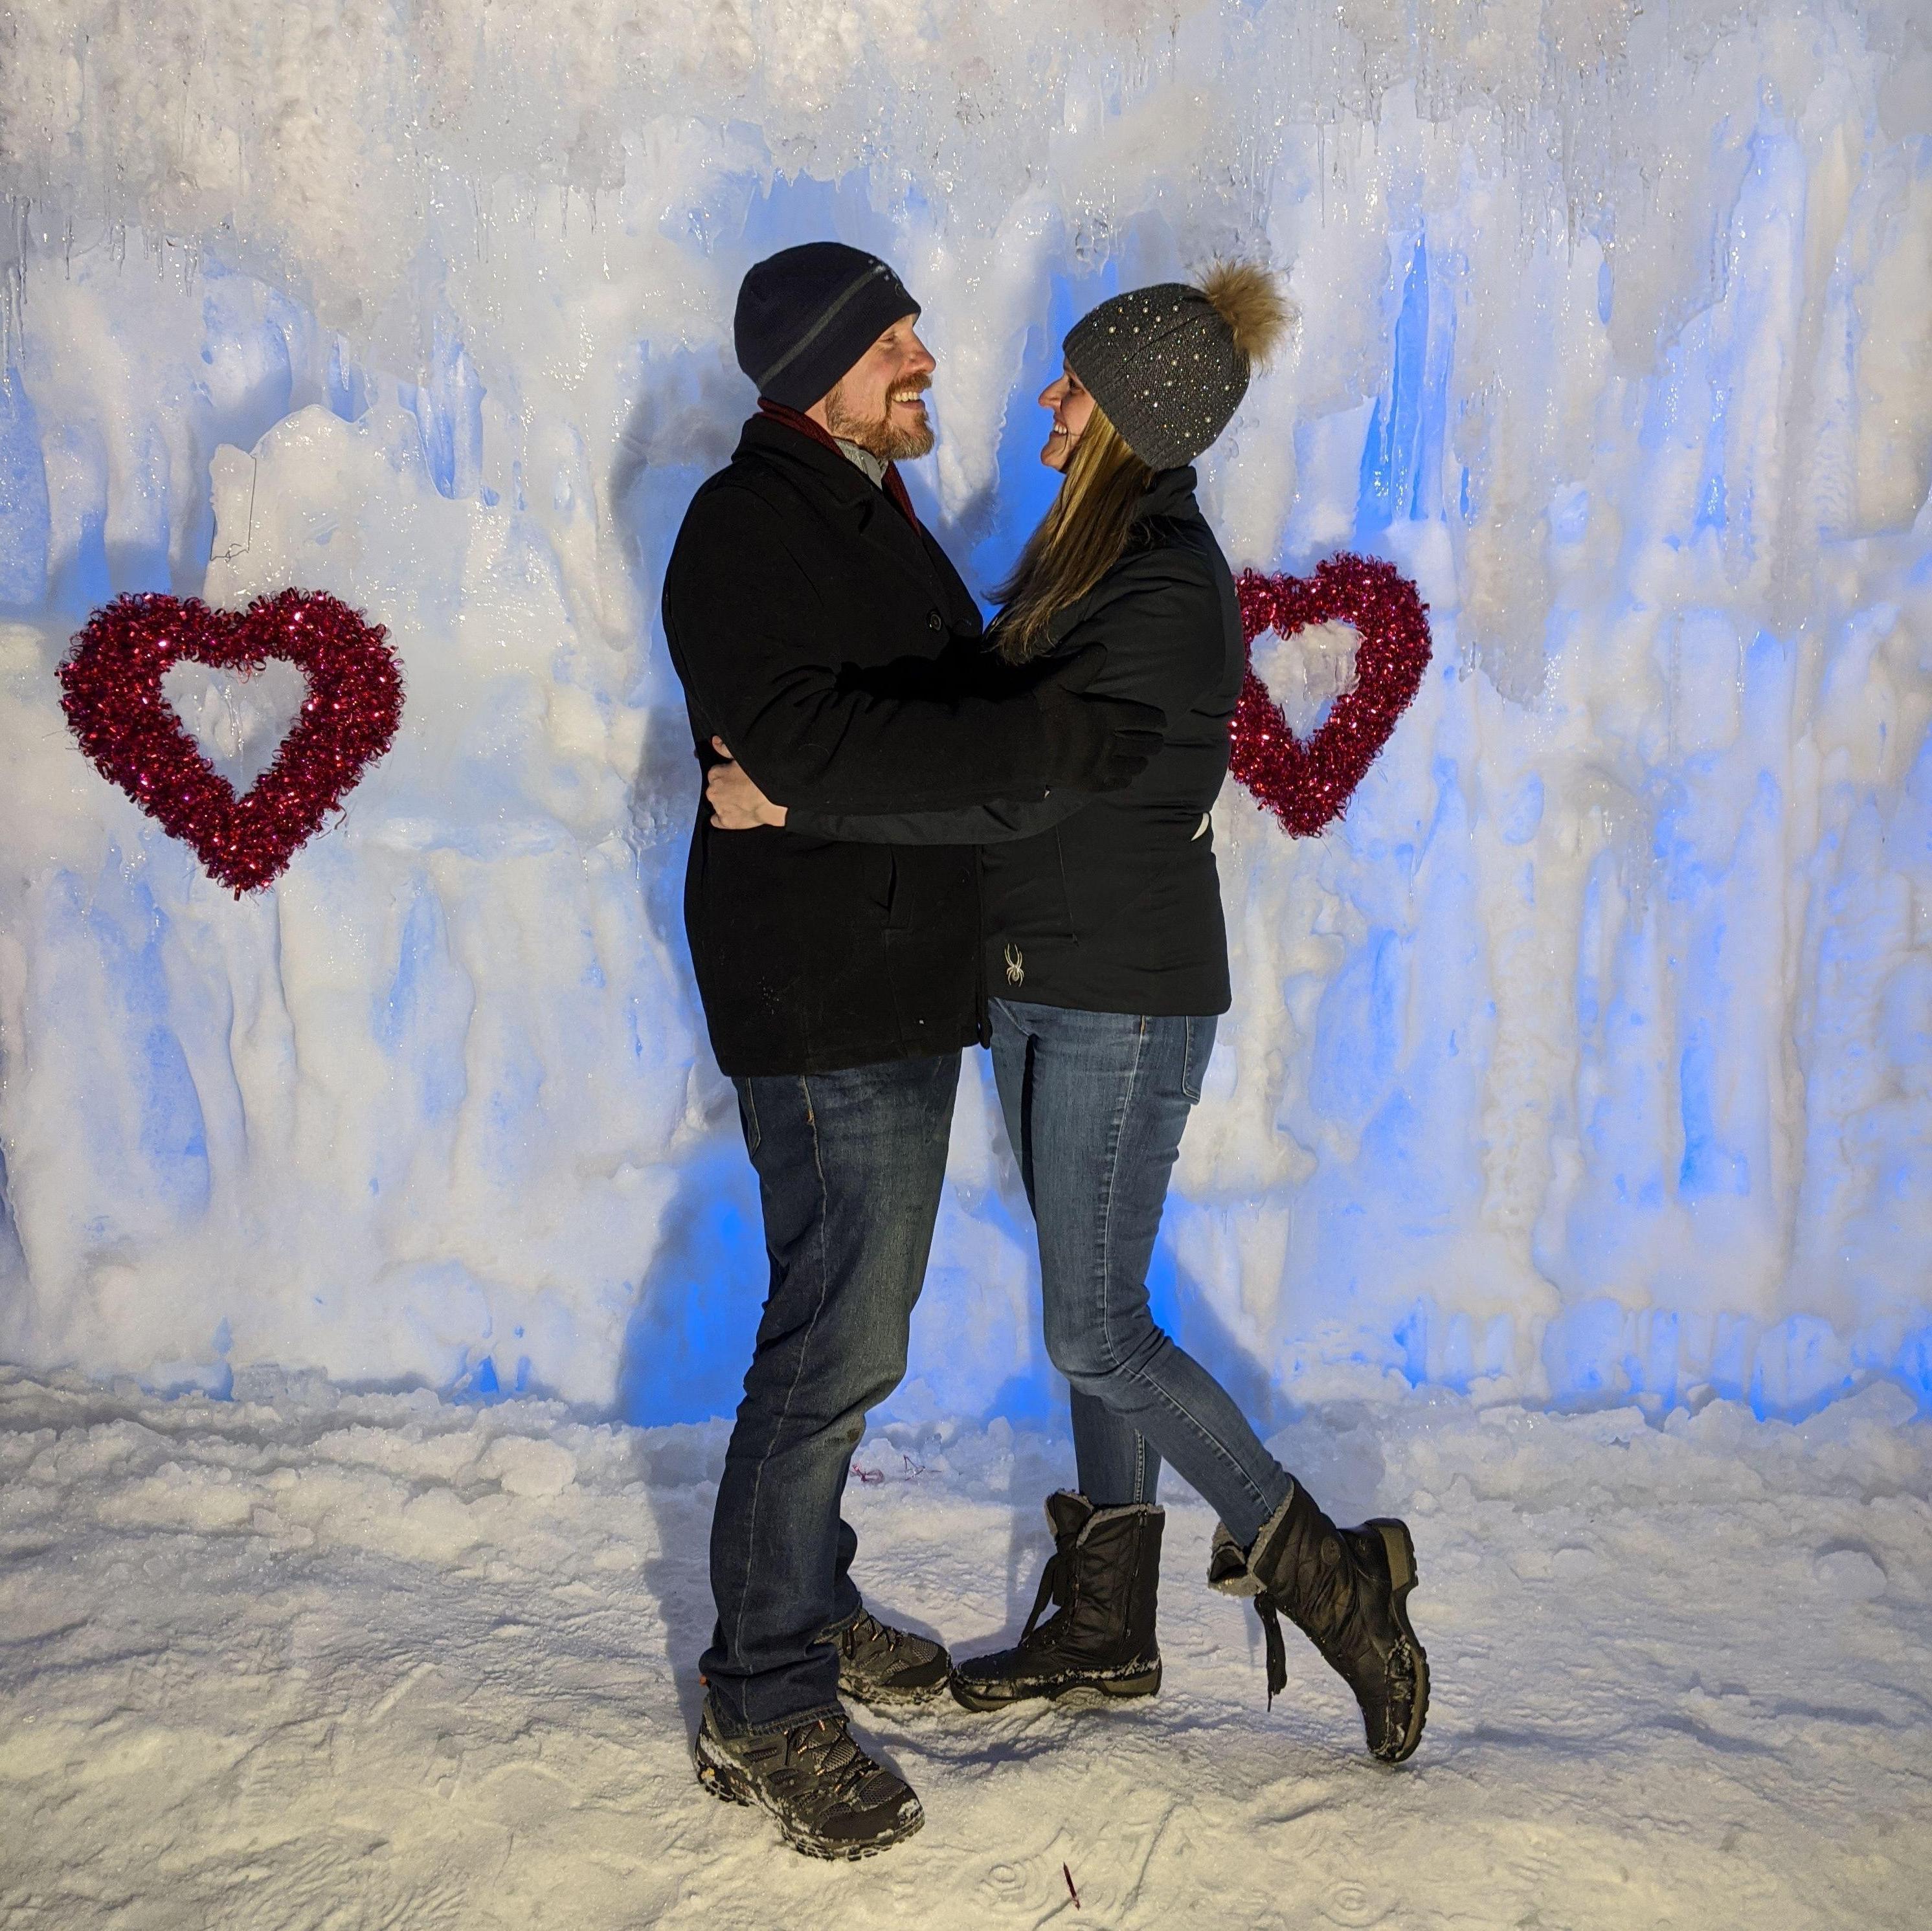 At the Dillon Ice Castle for our first Valentine's Day